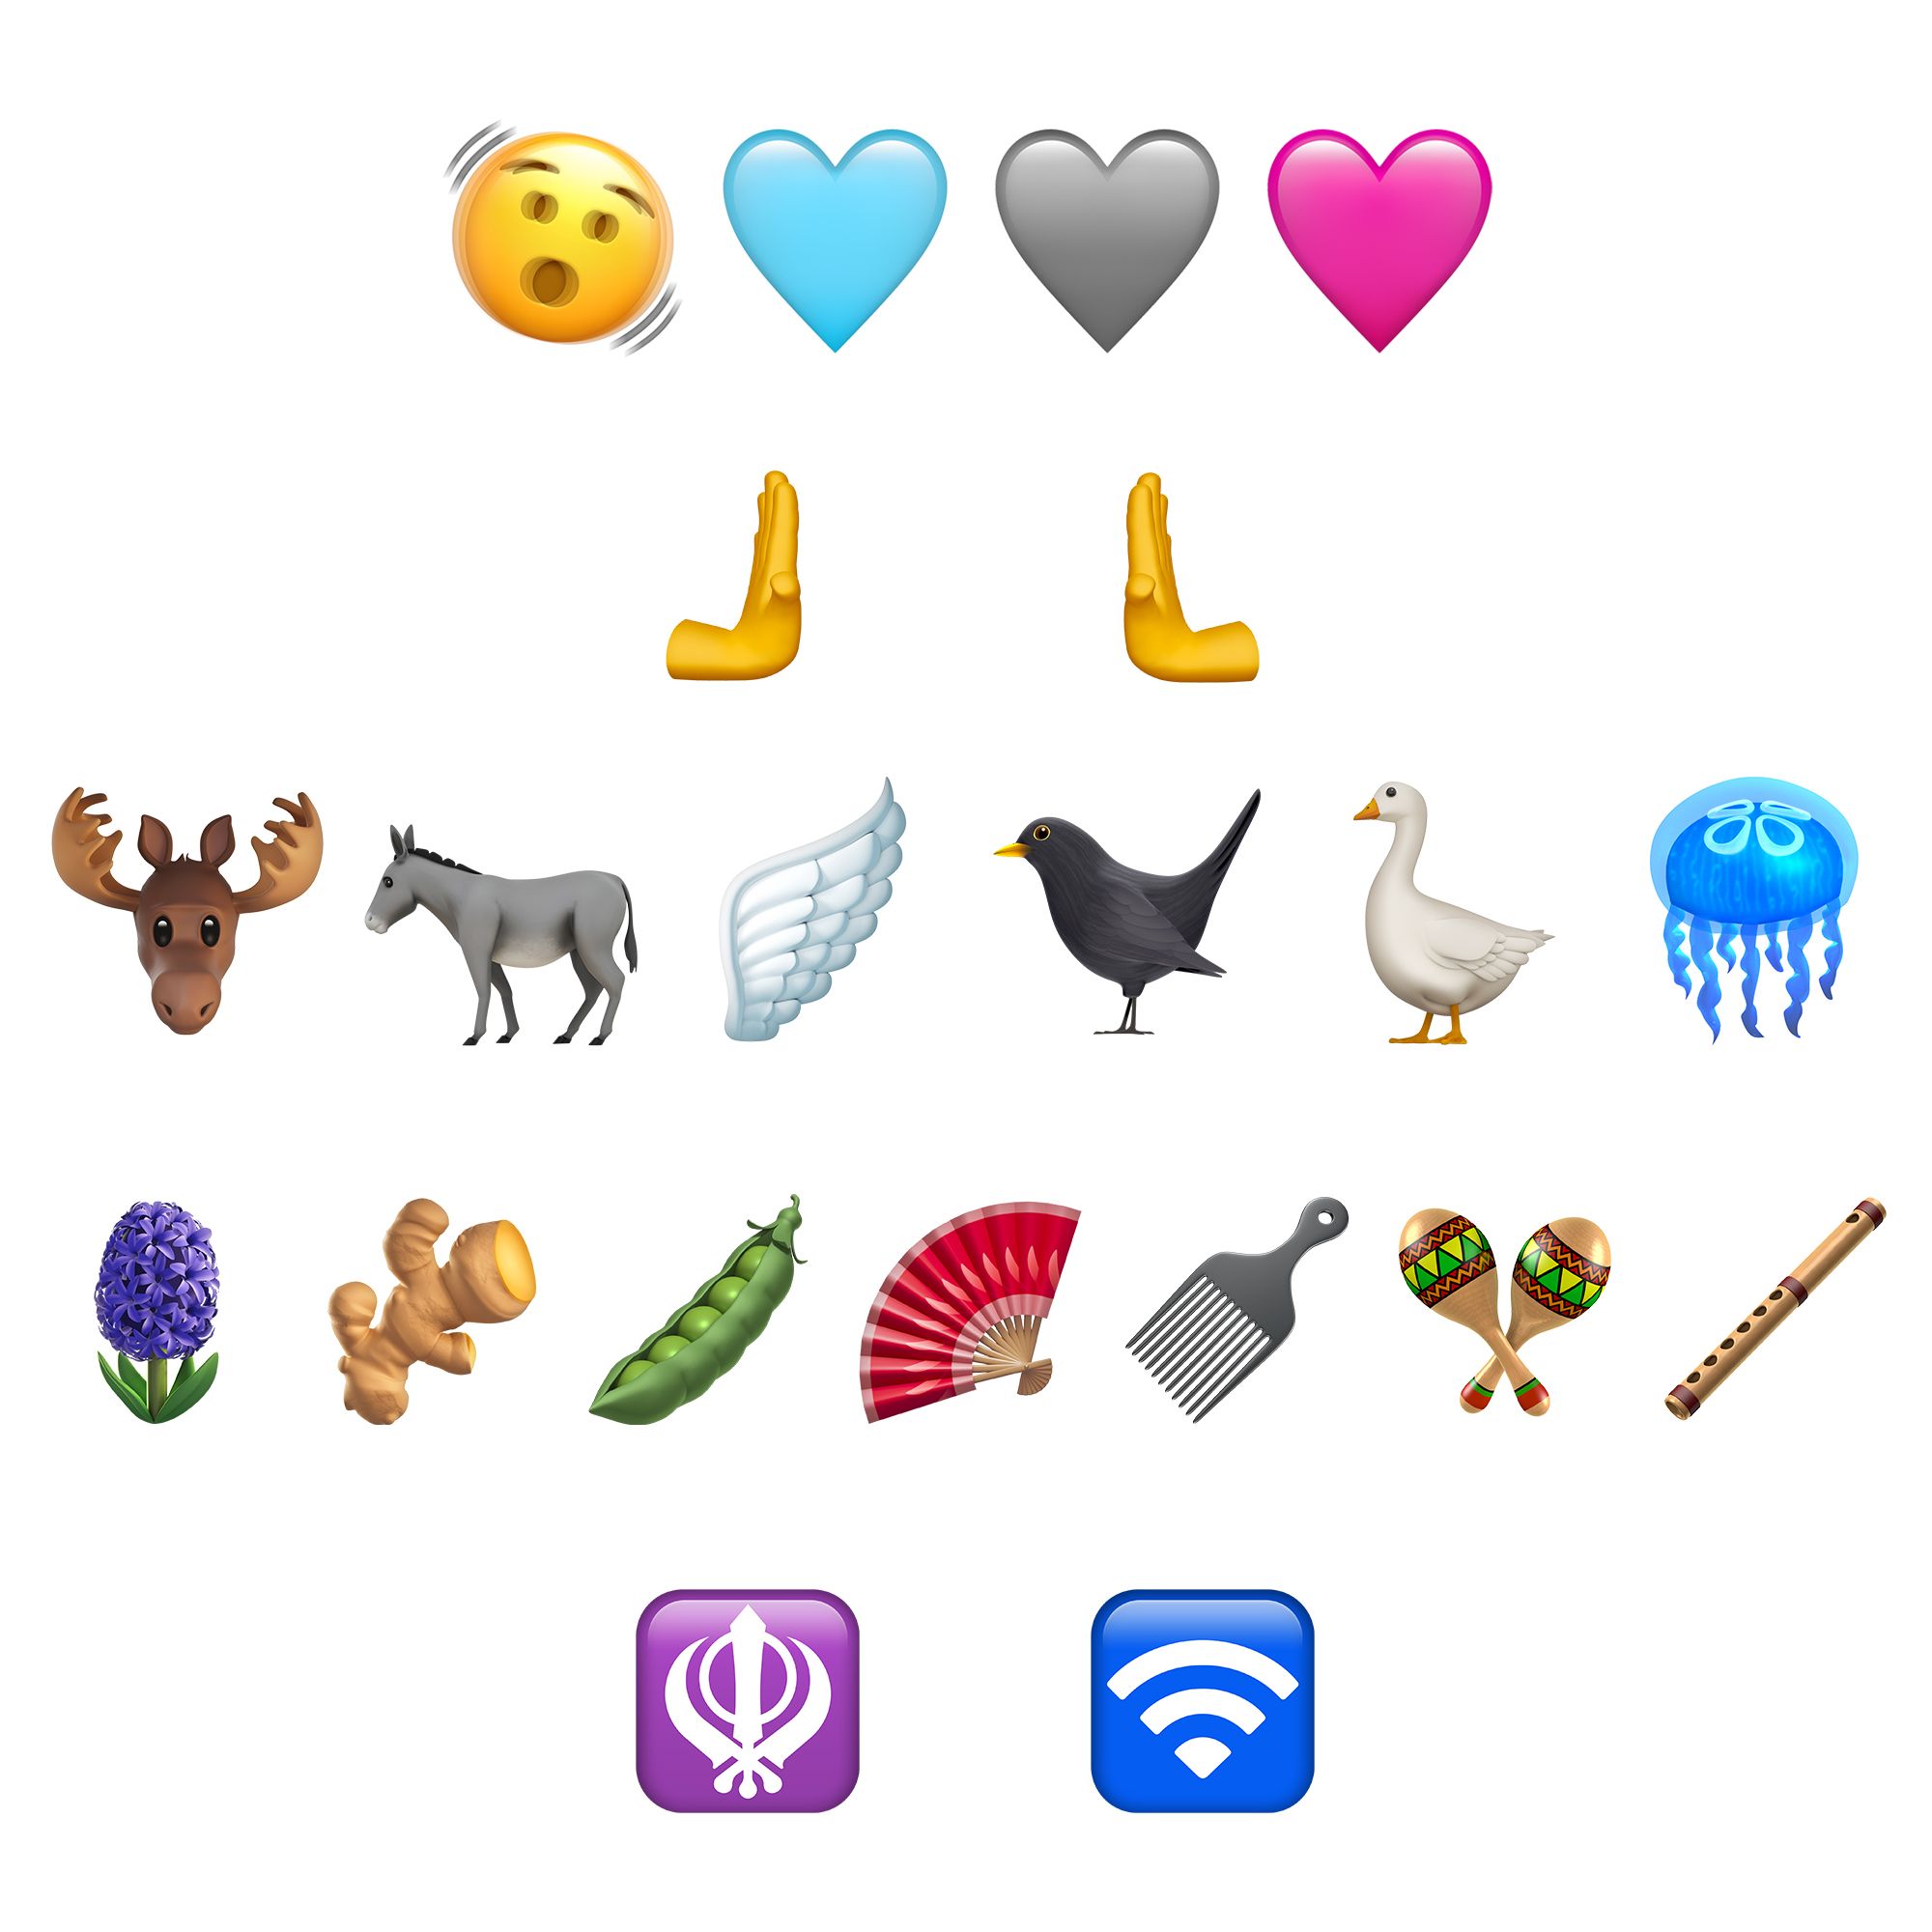 IOS Emojis What New Faces And Symbols Were Added?, 48 OFF